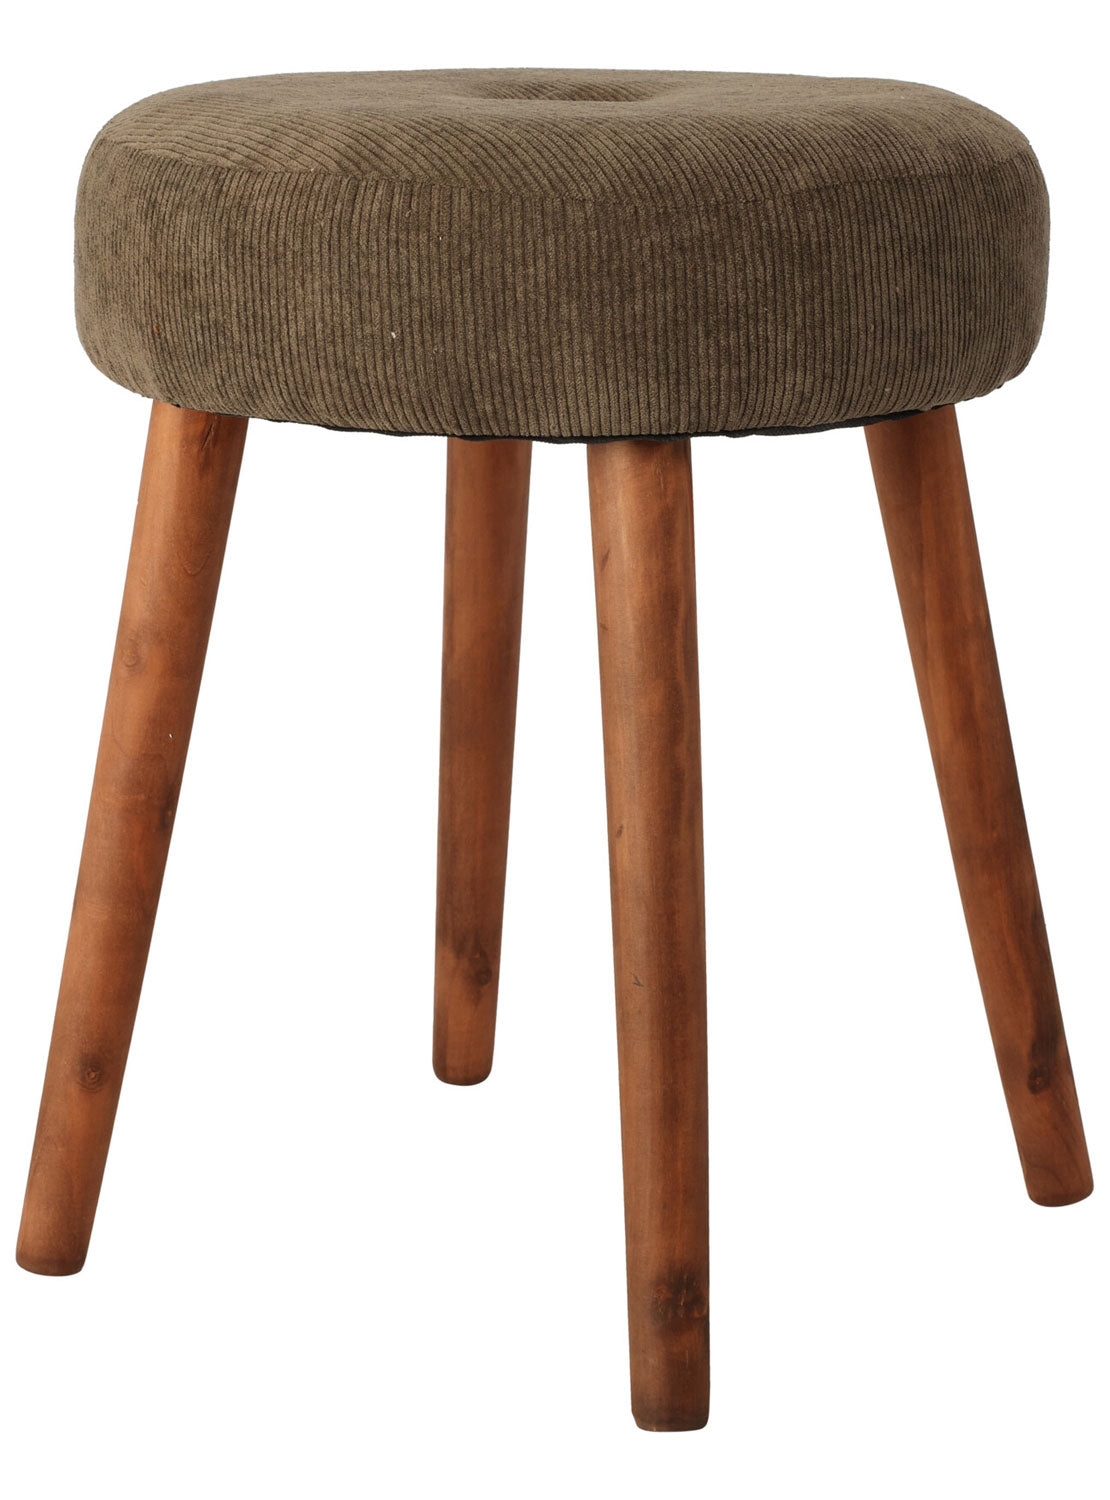 The Home Collection Corduroy Stool - Green 1 Shaws Department Stores